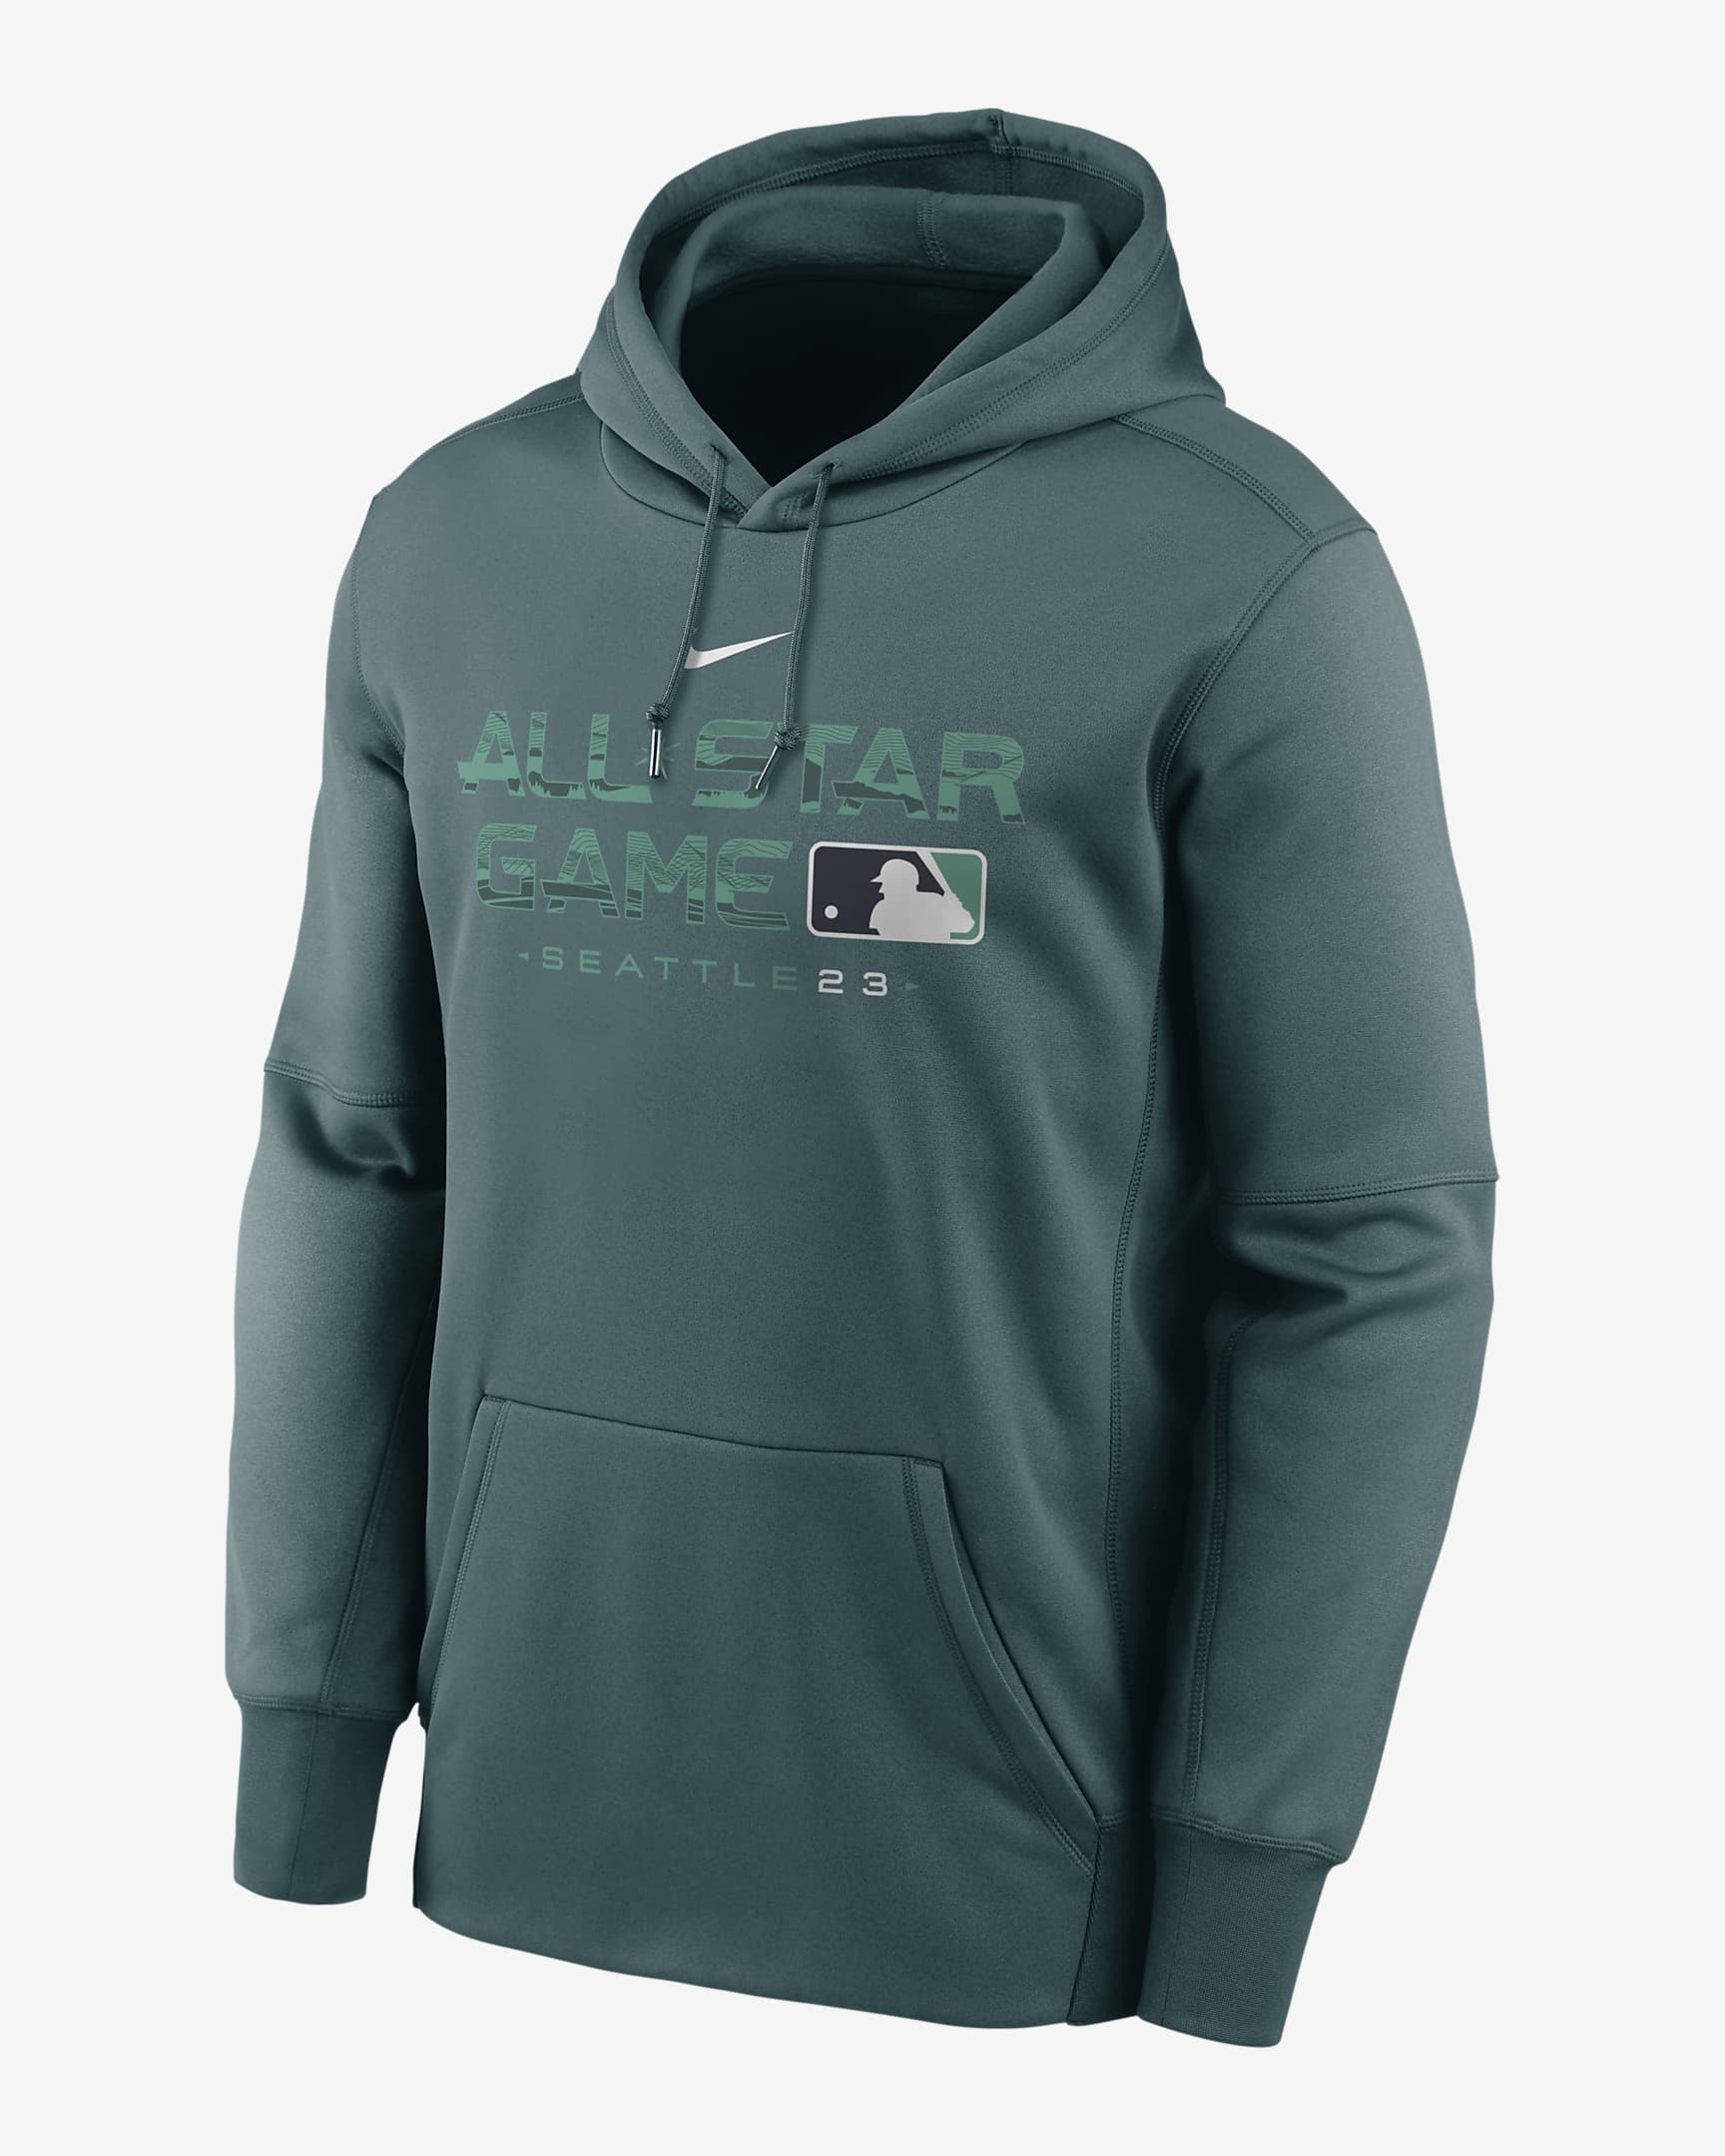 2023 All-Star Game Player Men’s Nike Therma MLB Pullover Hoodie. Nike.com